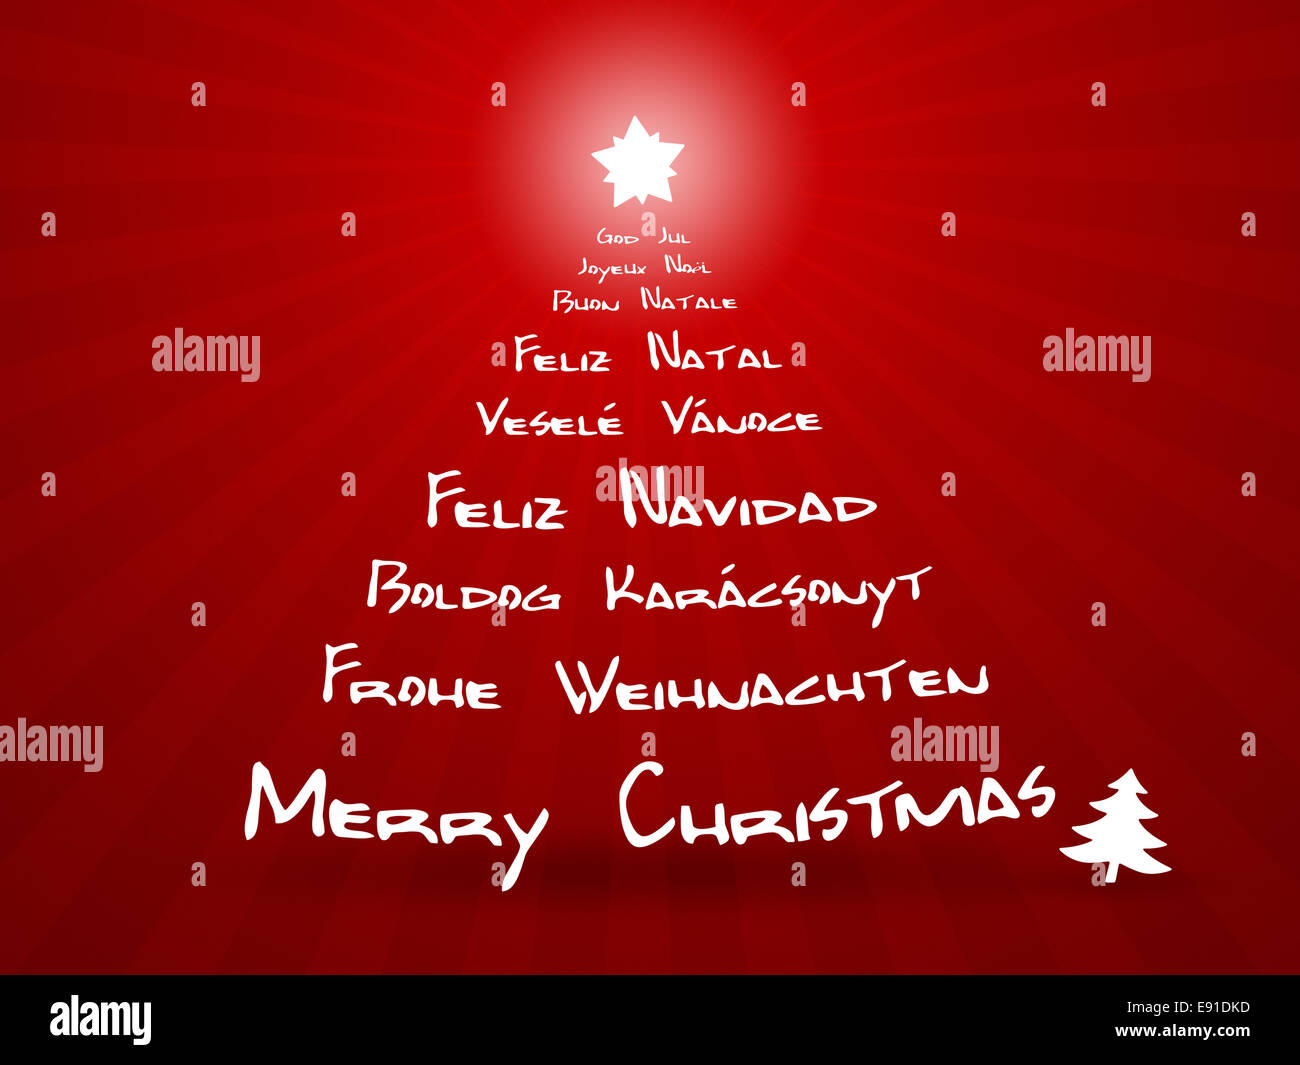 merry christmas in different languages Stock Photo